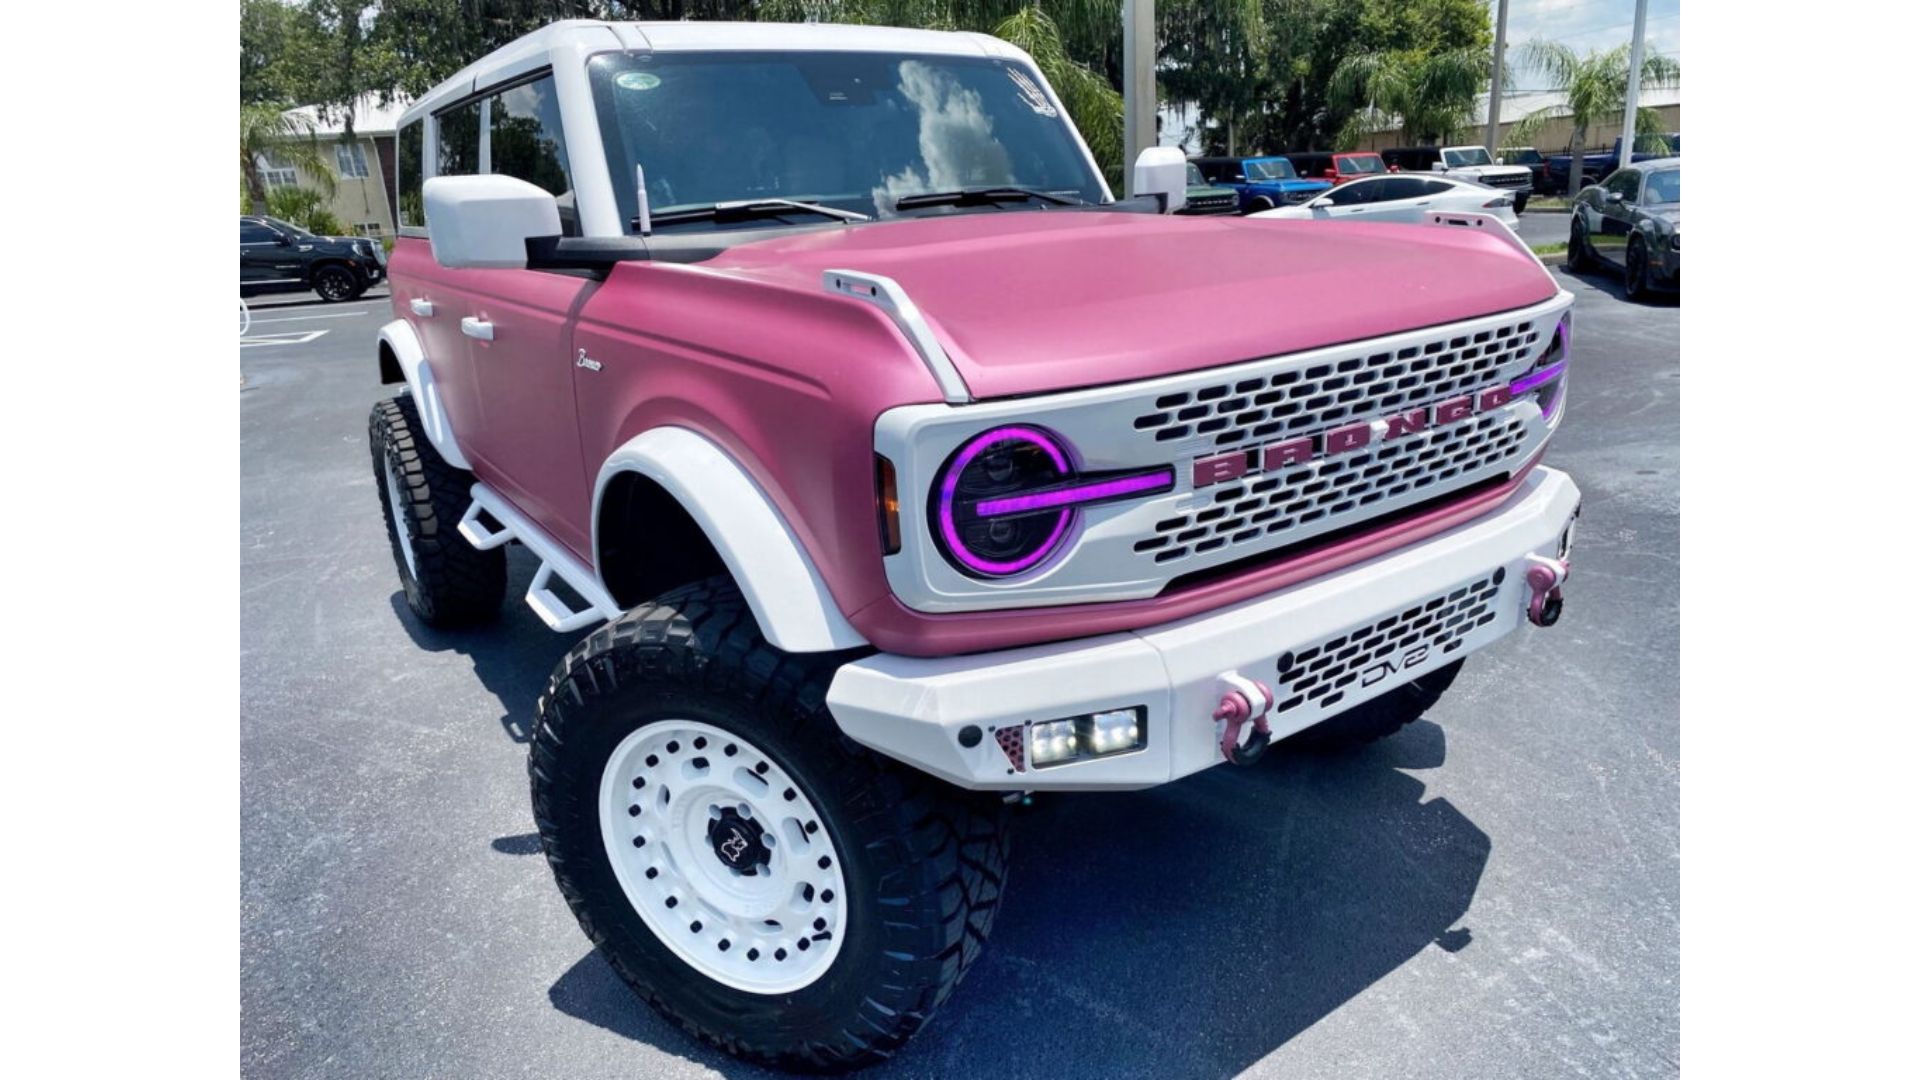 This custom pink Ford Bronco is good ride for Barbie and Ken